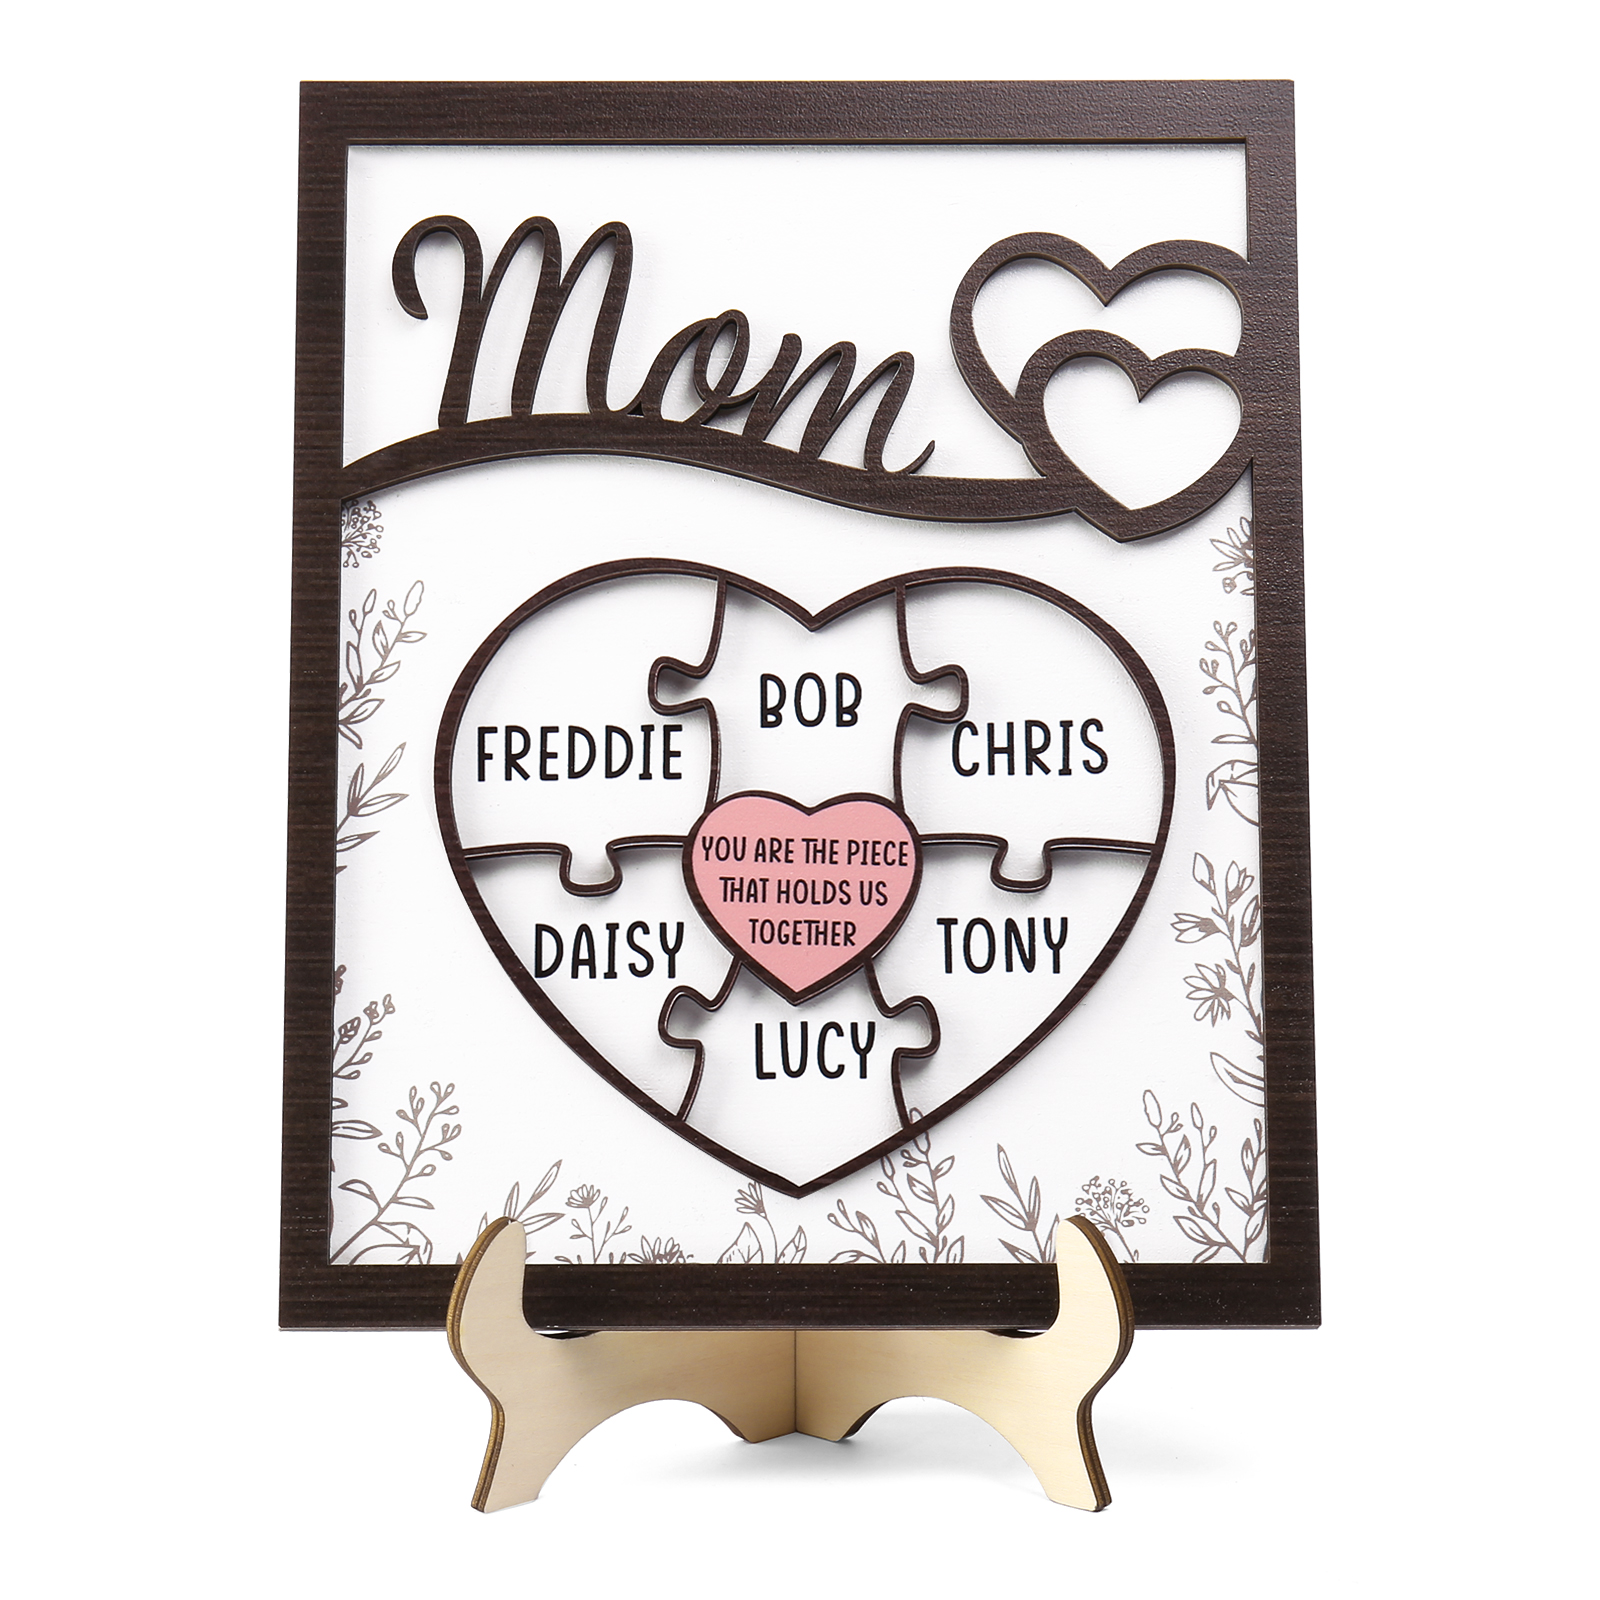 6 Names - Personalized Home Frame Wooden Decoration Customizable with 2 Texts, Love Pieces Wooden Board Painting for Mom